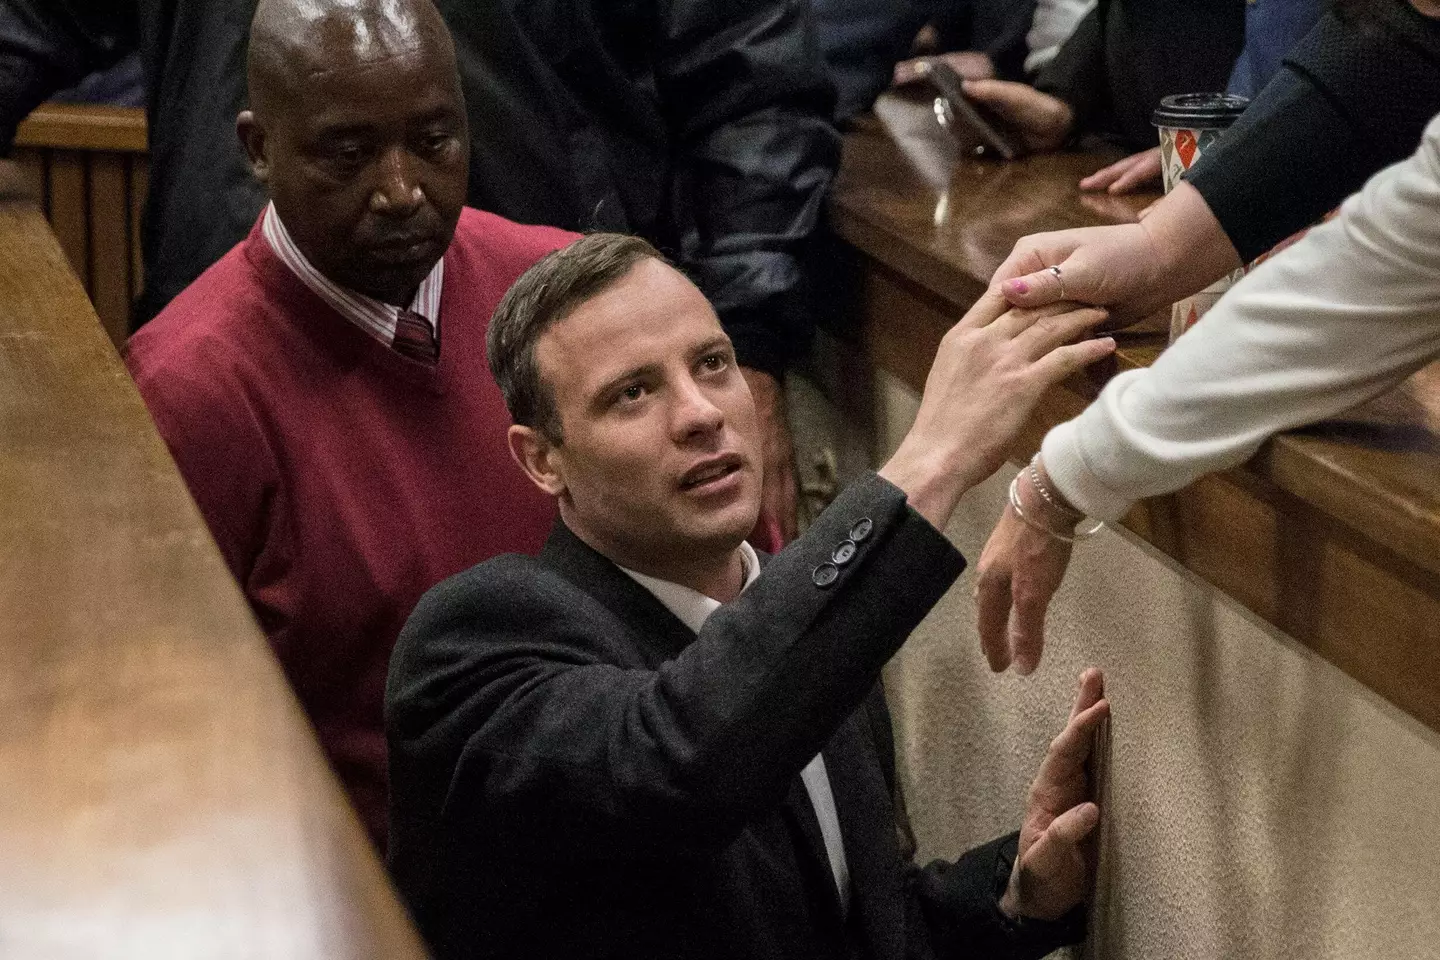 Pistorius has currently served half of his 13-year sentence, and is eligible for parole this year.